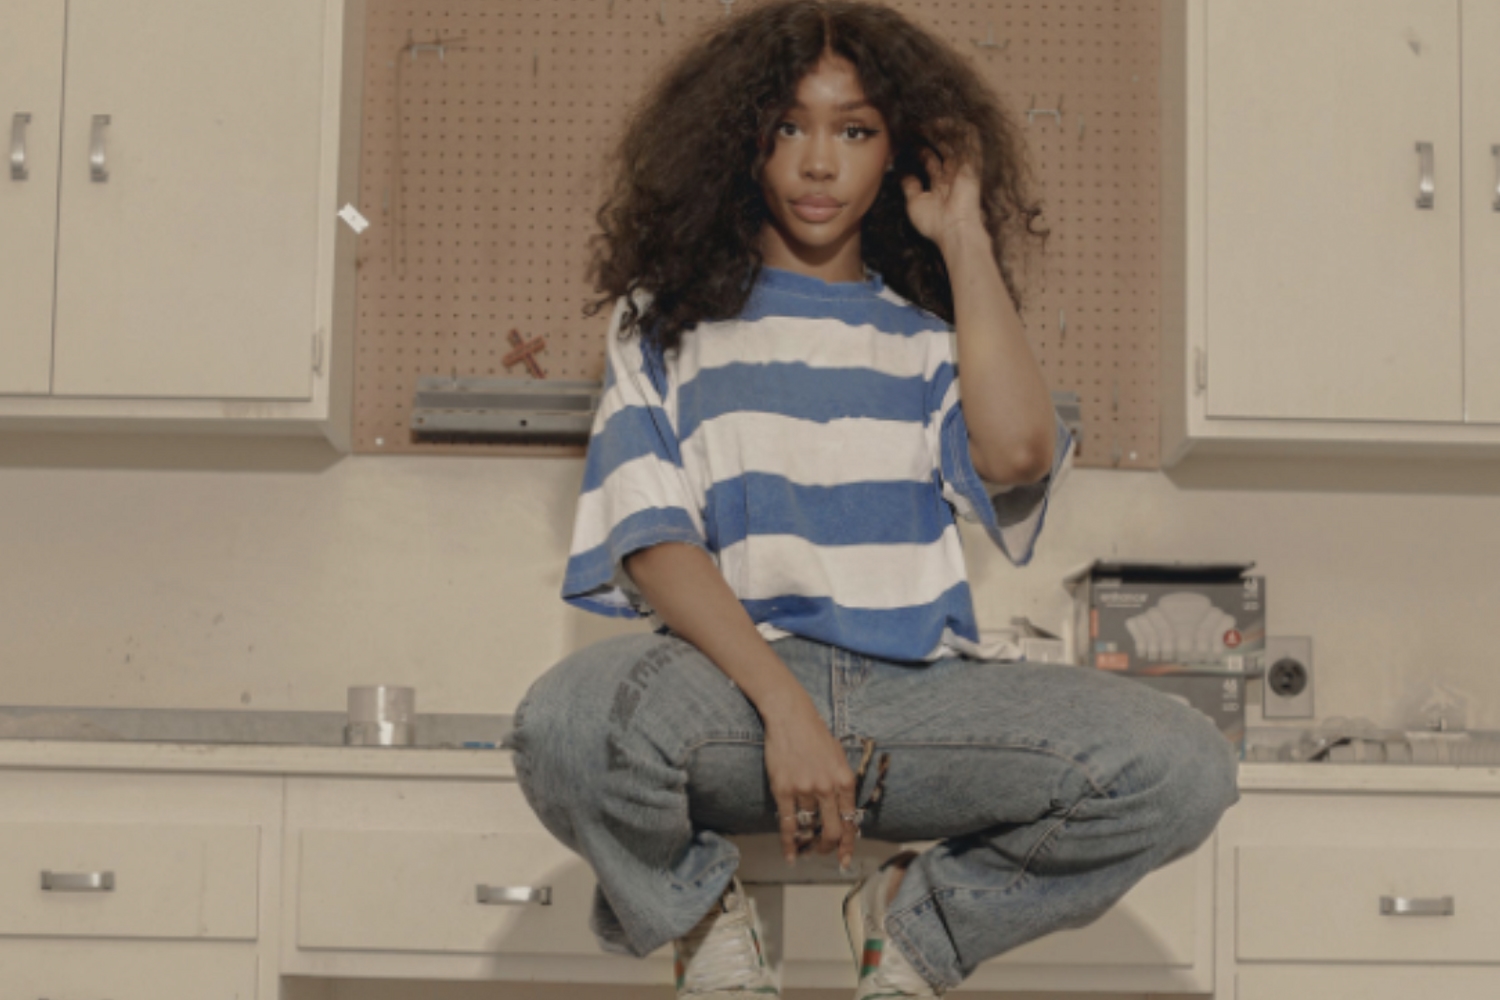 SZA shares new song ‘Good Days’